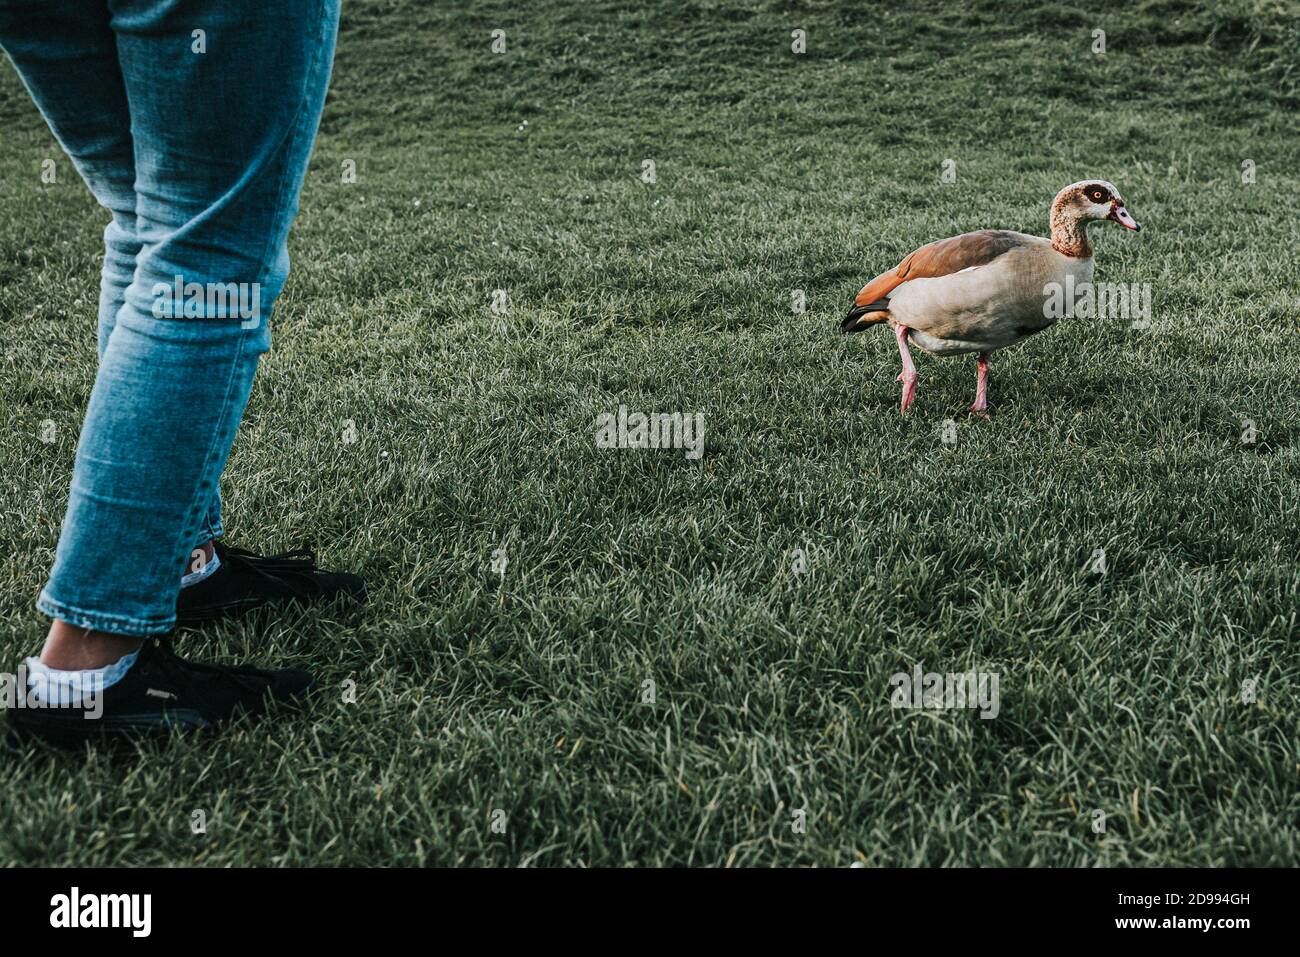 Young girl wearing jeans walking towards two ducks Alopochen aegyptiacus running in park during a spring day. Framing waist down to use the grass Stock Photo